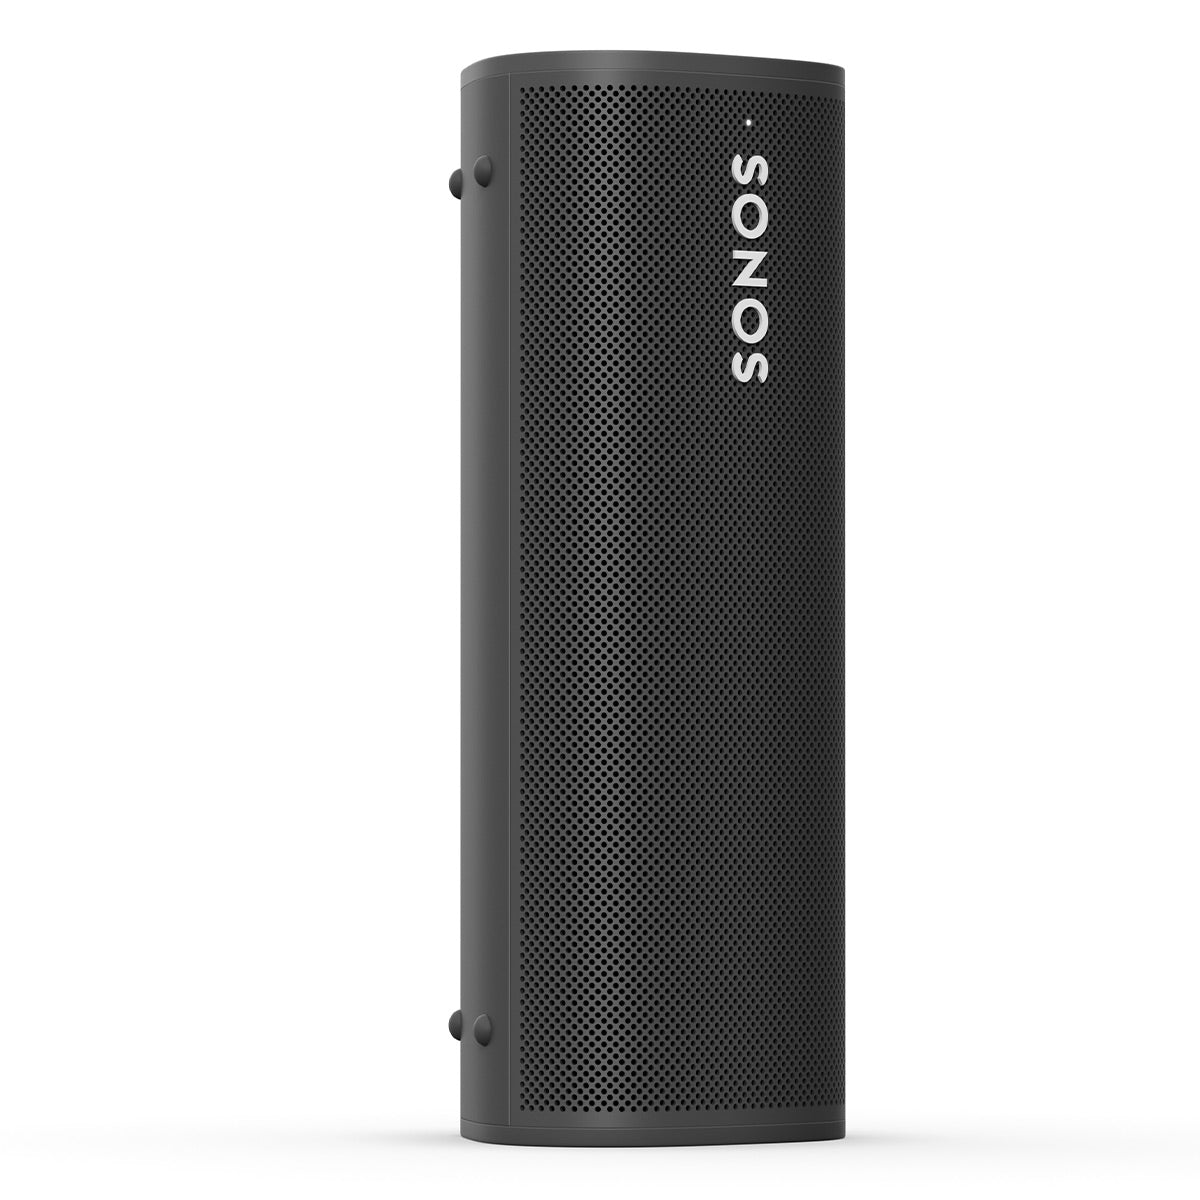 Sonos Roam SL Portable Wireless Speaker is Cheaper but Loses Features 